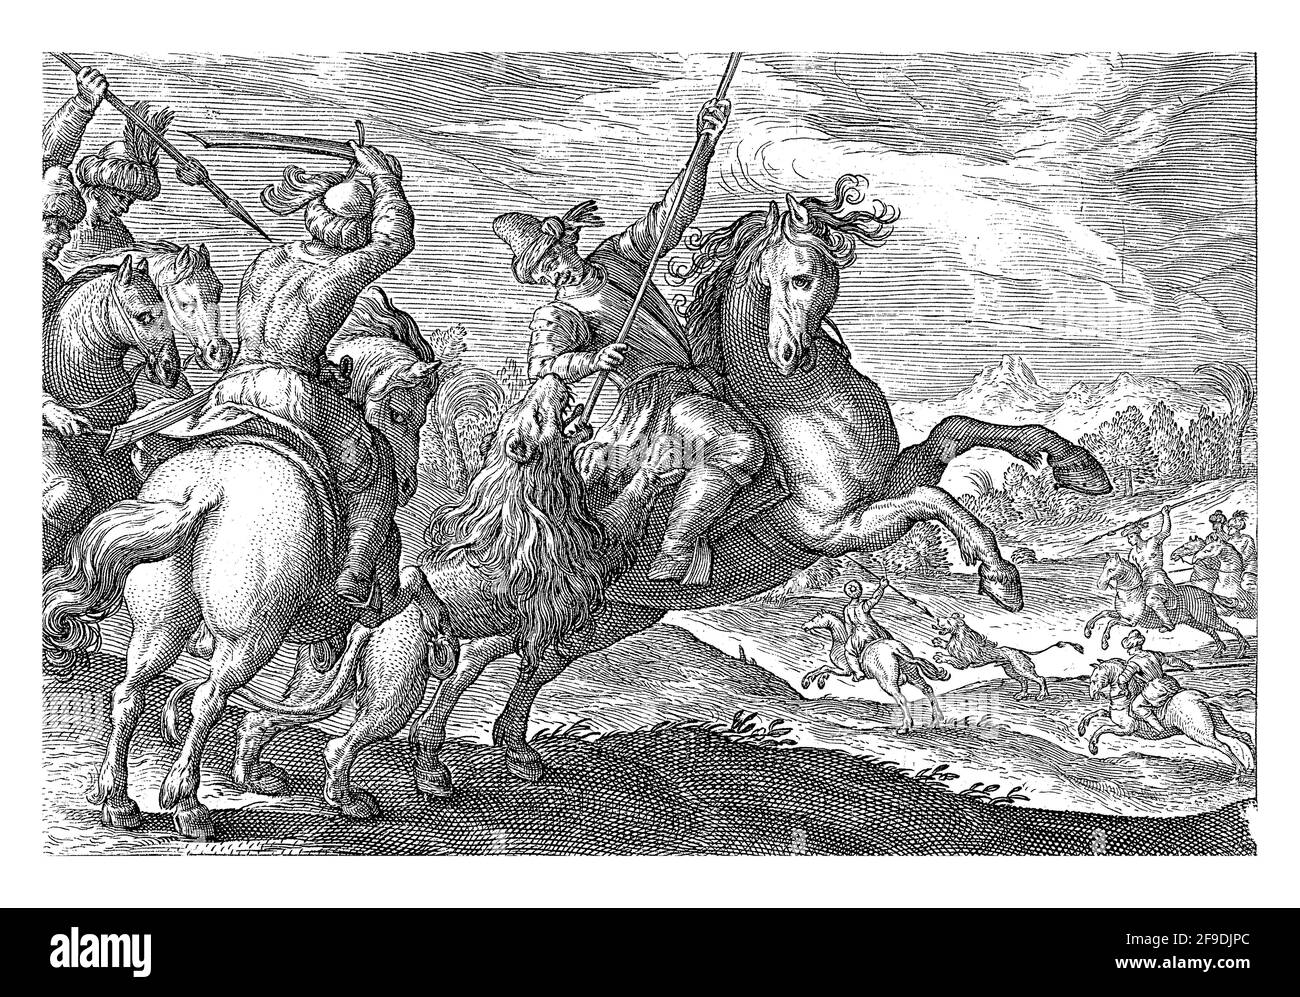 Landscape with four horsemen chasing a lion in the foreground. One of them has put his spear in the lion's mouth. In the background horsemen on a lion Stock Photo